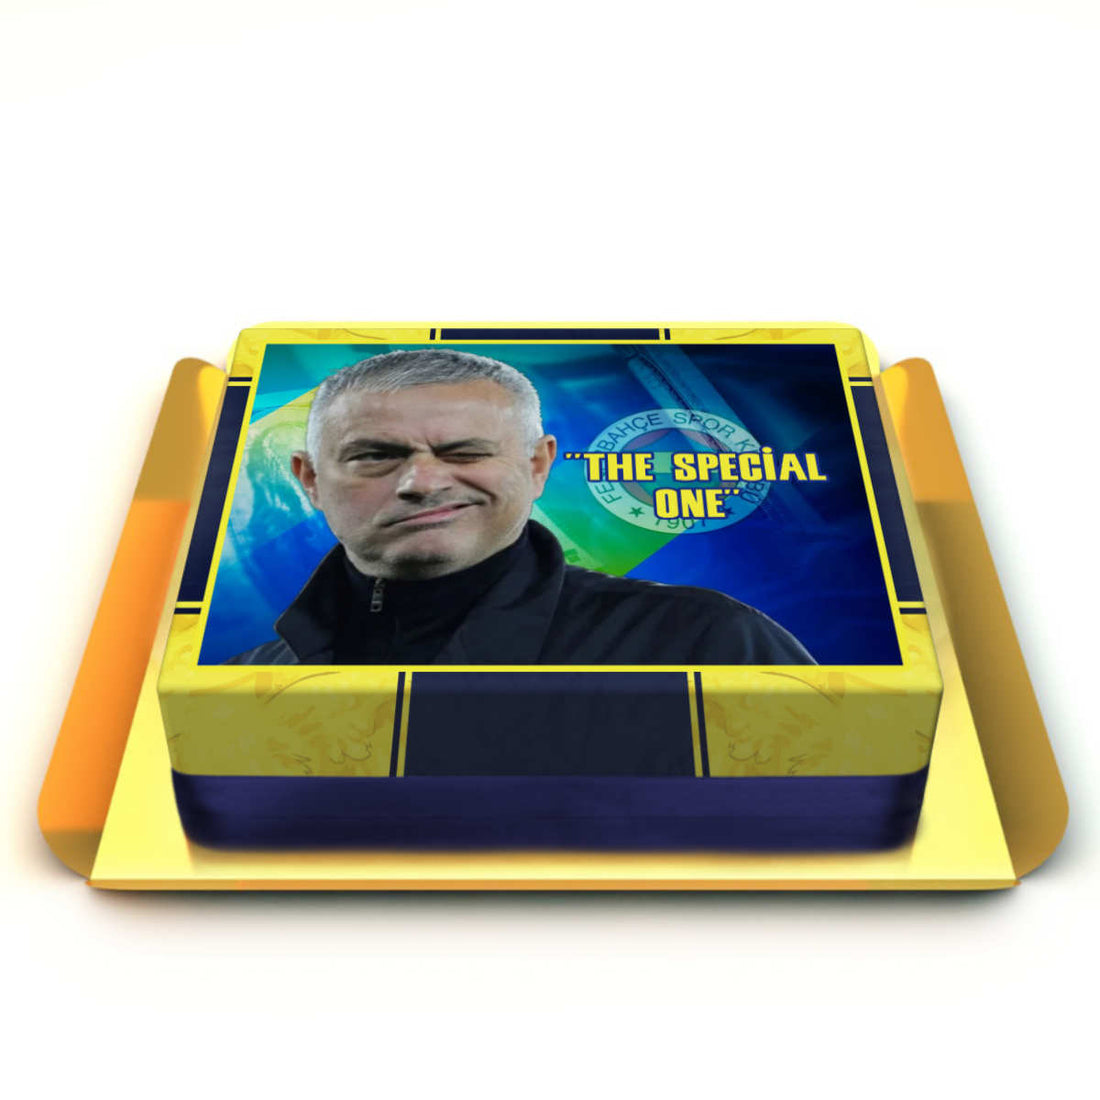 The special one cake